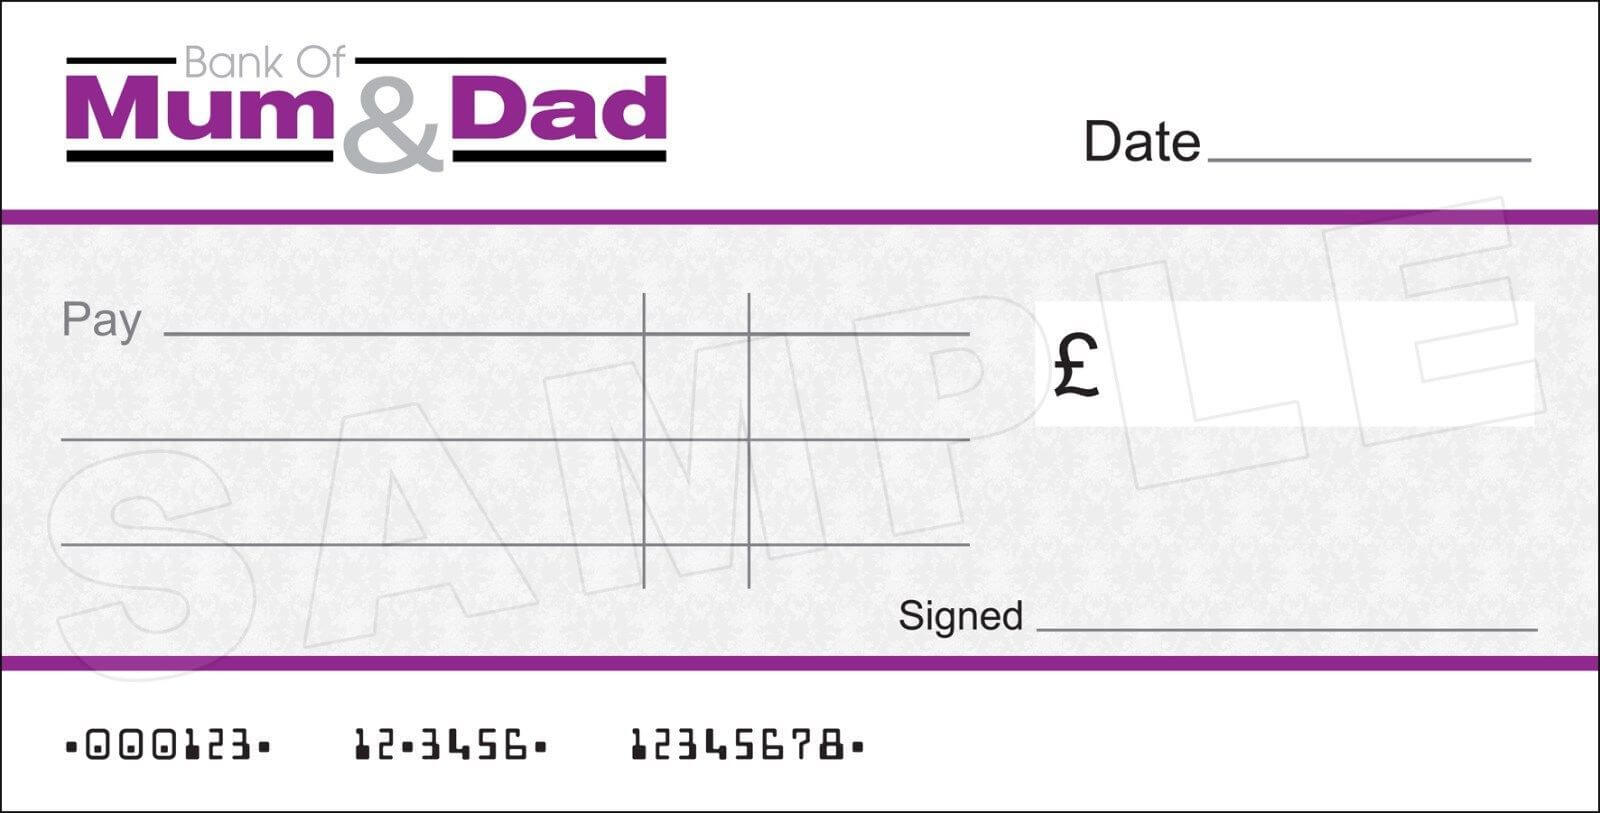 Details About Large Blank Bank Of Mum & Dad Cheque | Dads Inside Large Blank Cheque Template